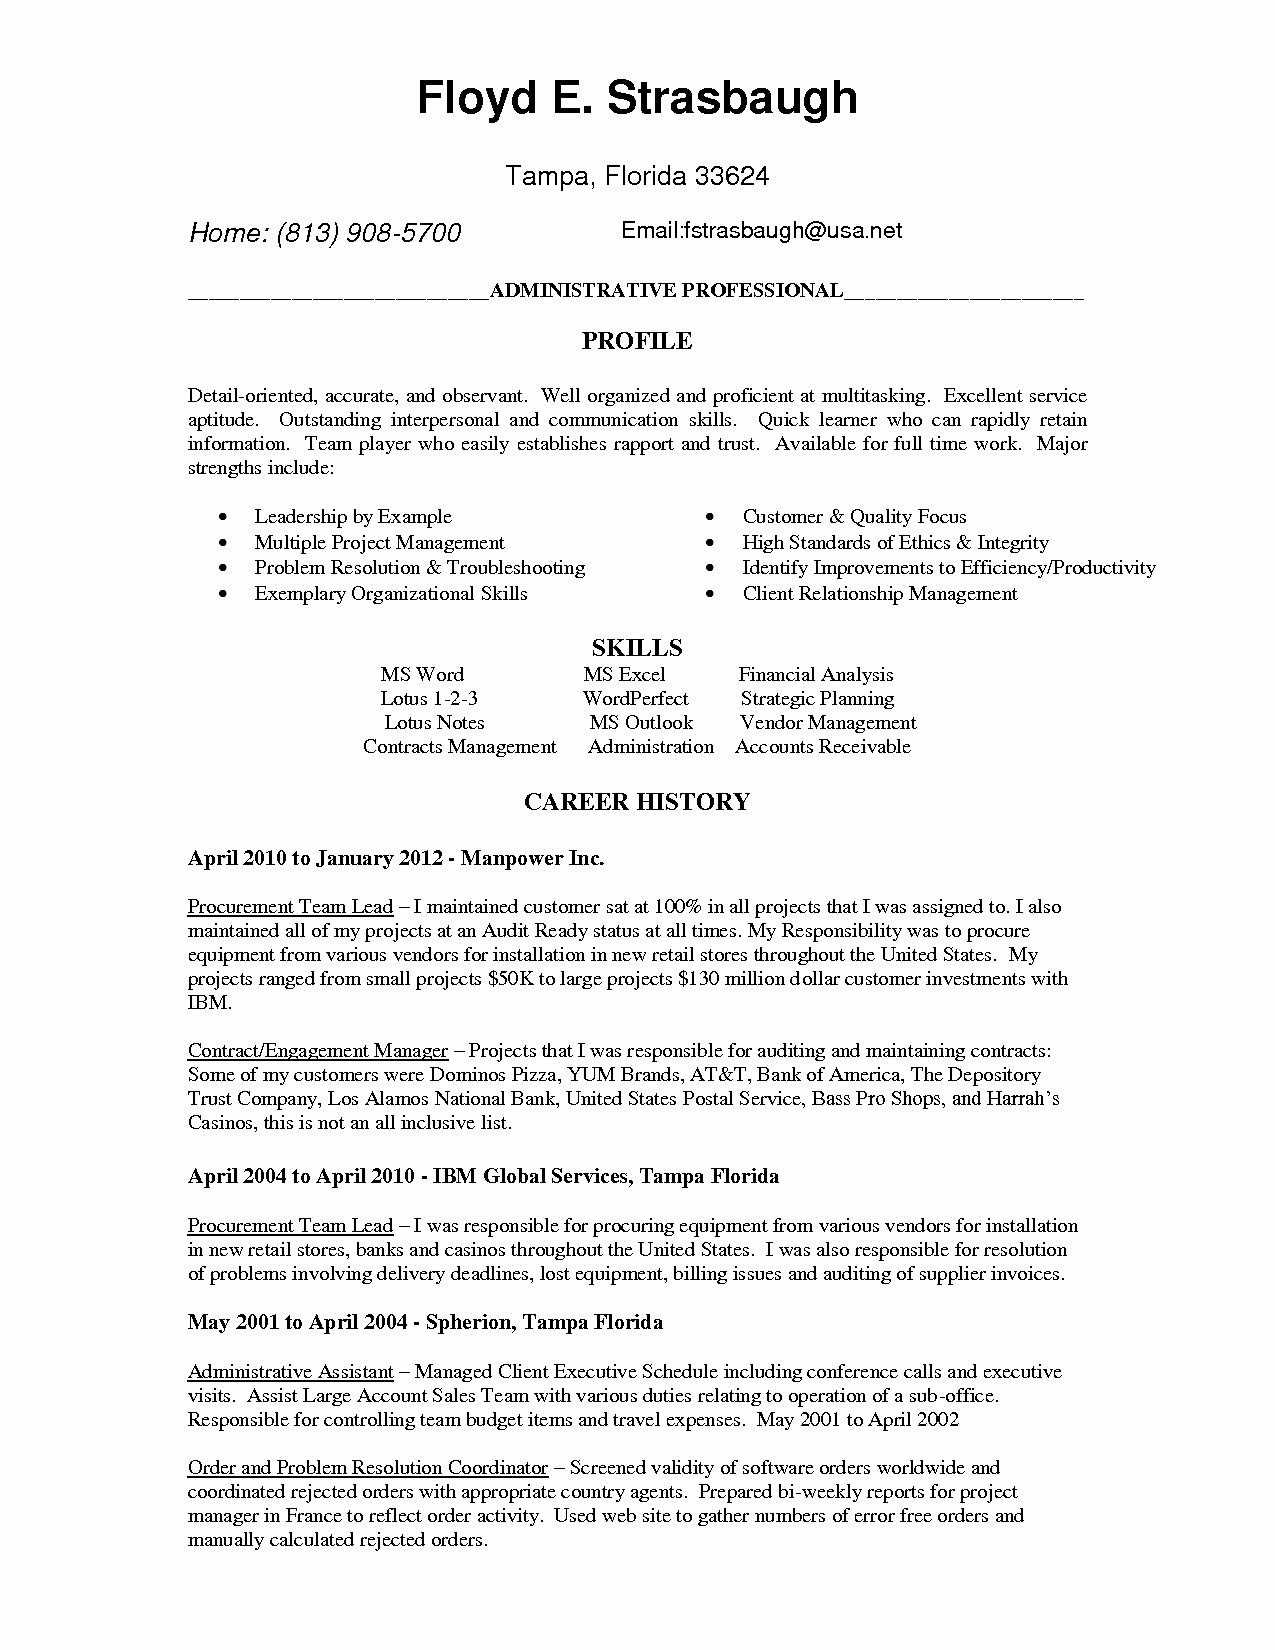 best cover letter template word example-Free Microsoft Word Resume Templates Awesome Professional Job Resume Template Od Specialist Cover Letter Lead Staggering Business Ppt Templates Free 19-f